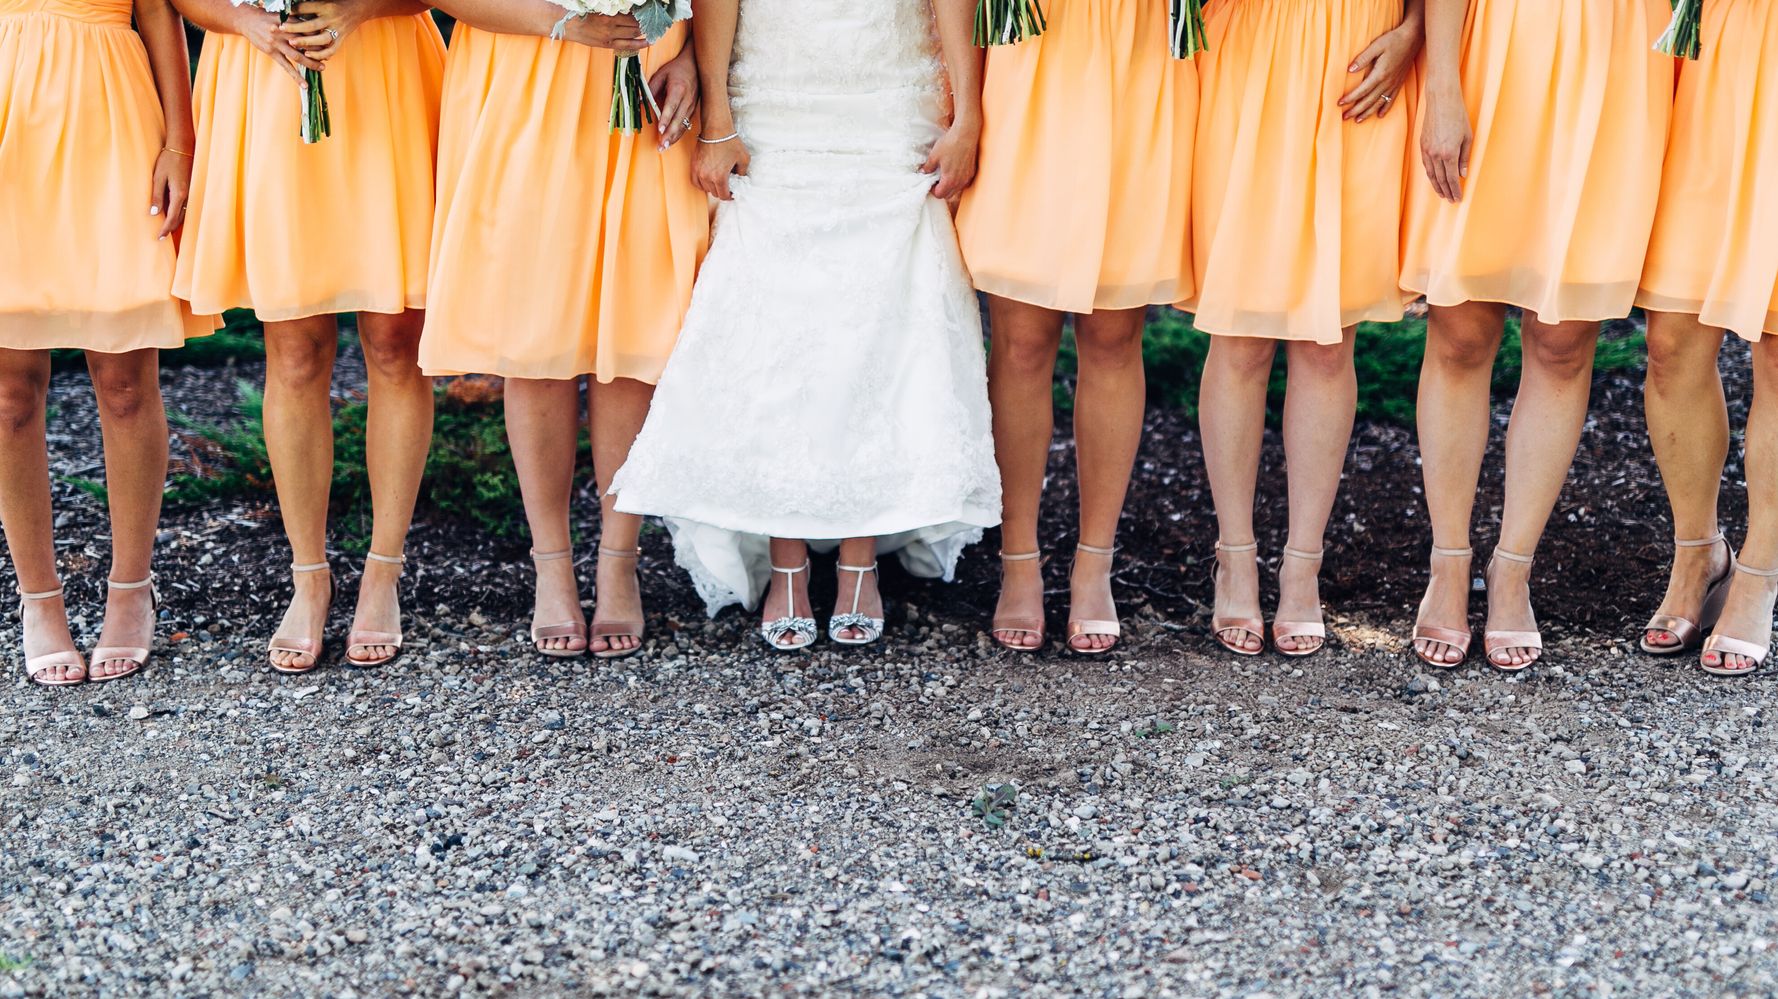 Woman Poses With Her 34 Bridesmaids – But How Many Is Too Many